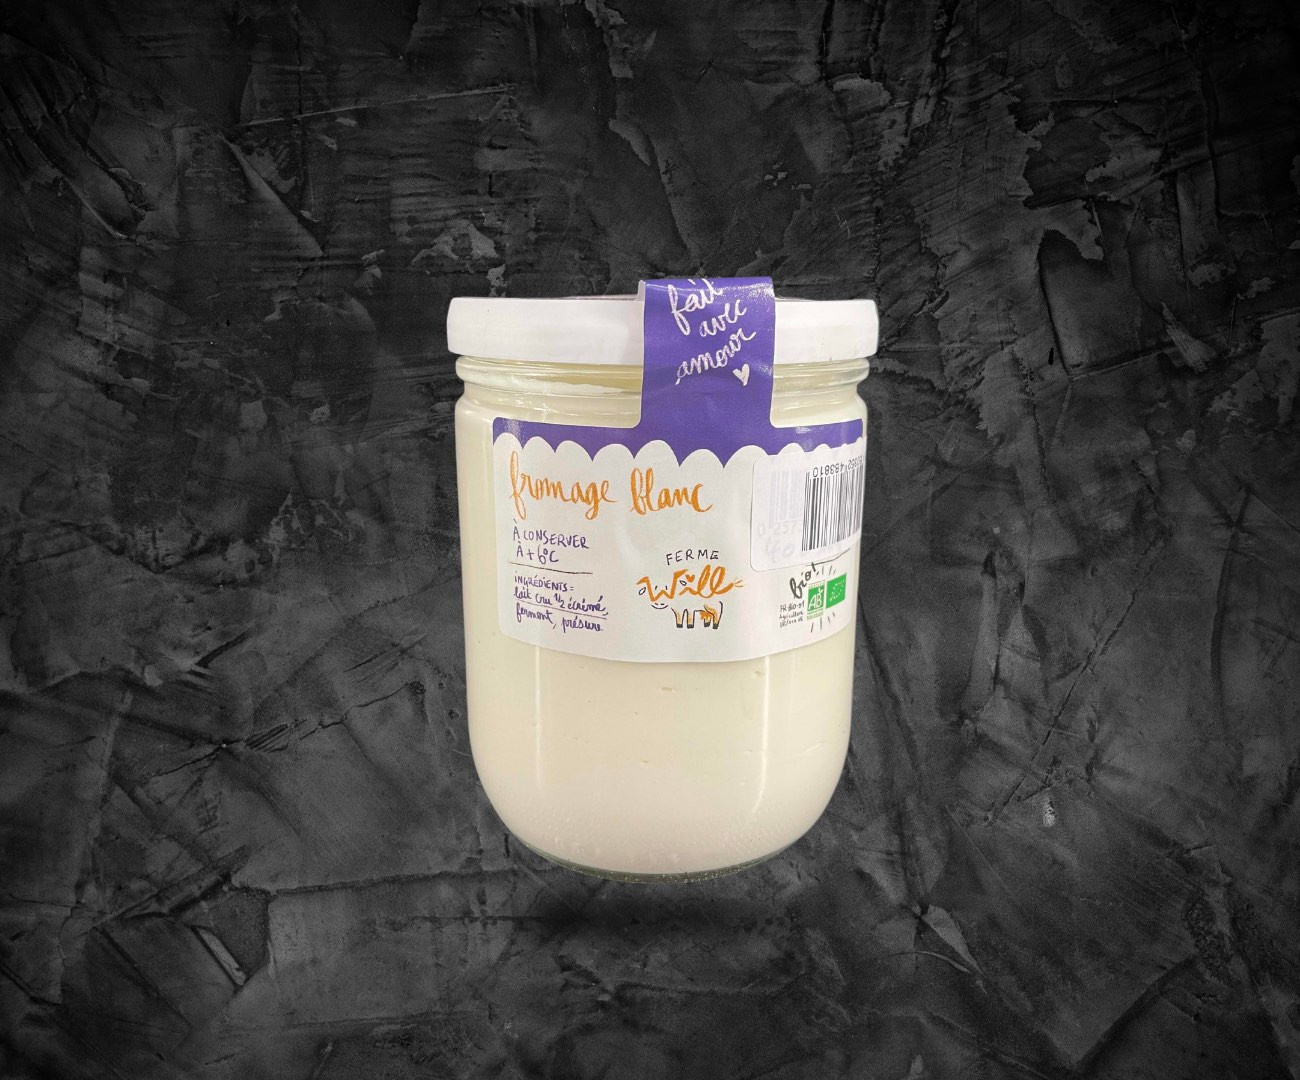 Fromage blanc 400g